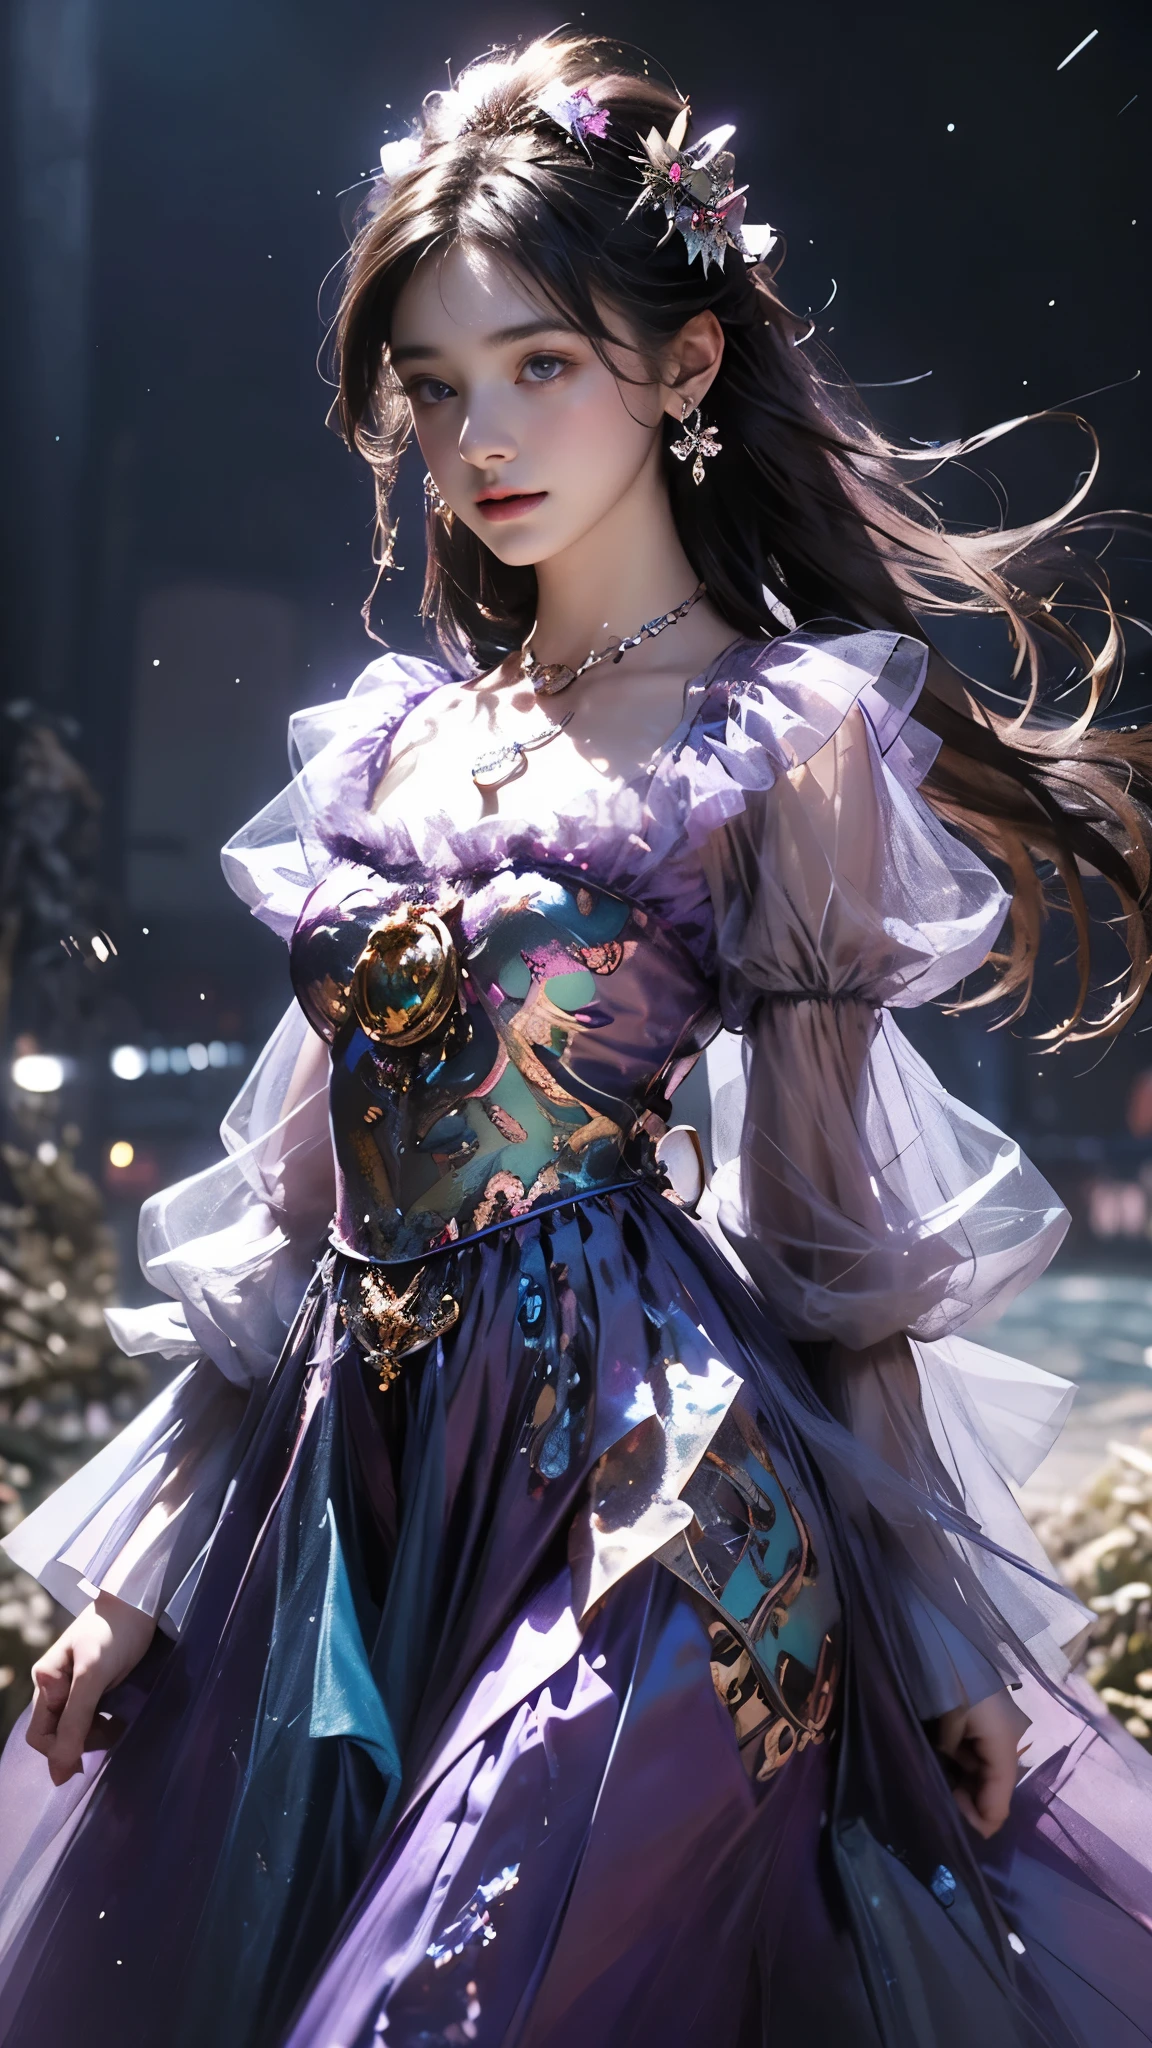 8K, ultra hd, masterpiece, 1 girl, (good face:1.4), detailed eyes, very long hair, impressive hairstyle, earings, necklace, small breasts, (purple outfit:1.5), see-through, tulle dress, (fantasy outfit:1.5) Light-colored foundation brings out the transparency of the skin, (in the wonderland:1.5), mystery, diwali lights, glowing lights, very decoration, The moonlight falls like water, perfect body,